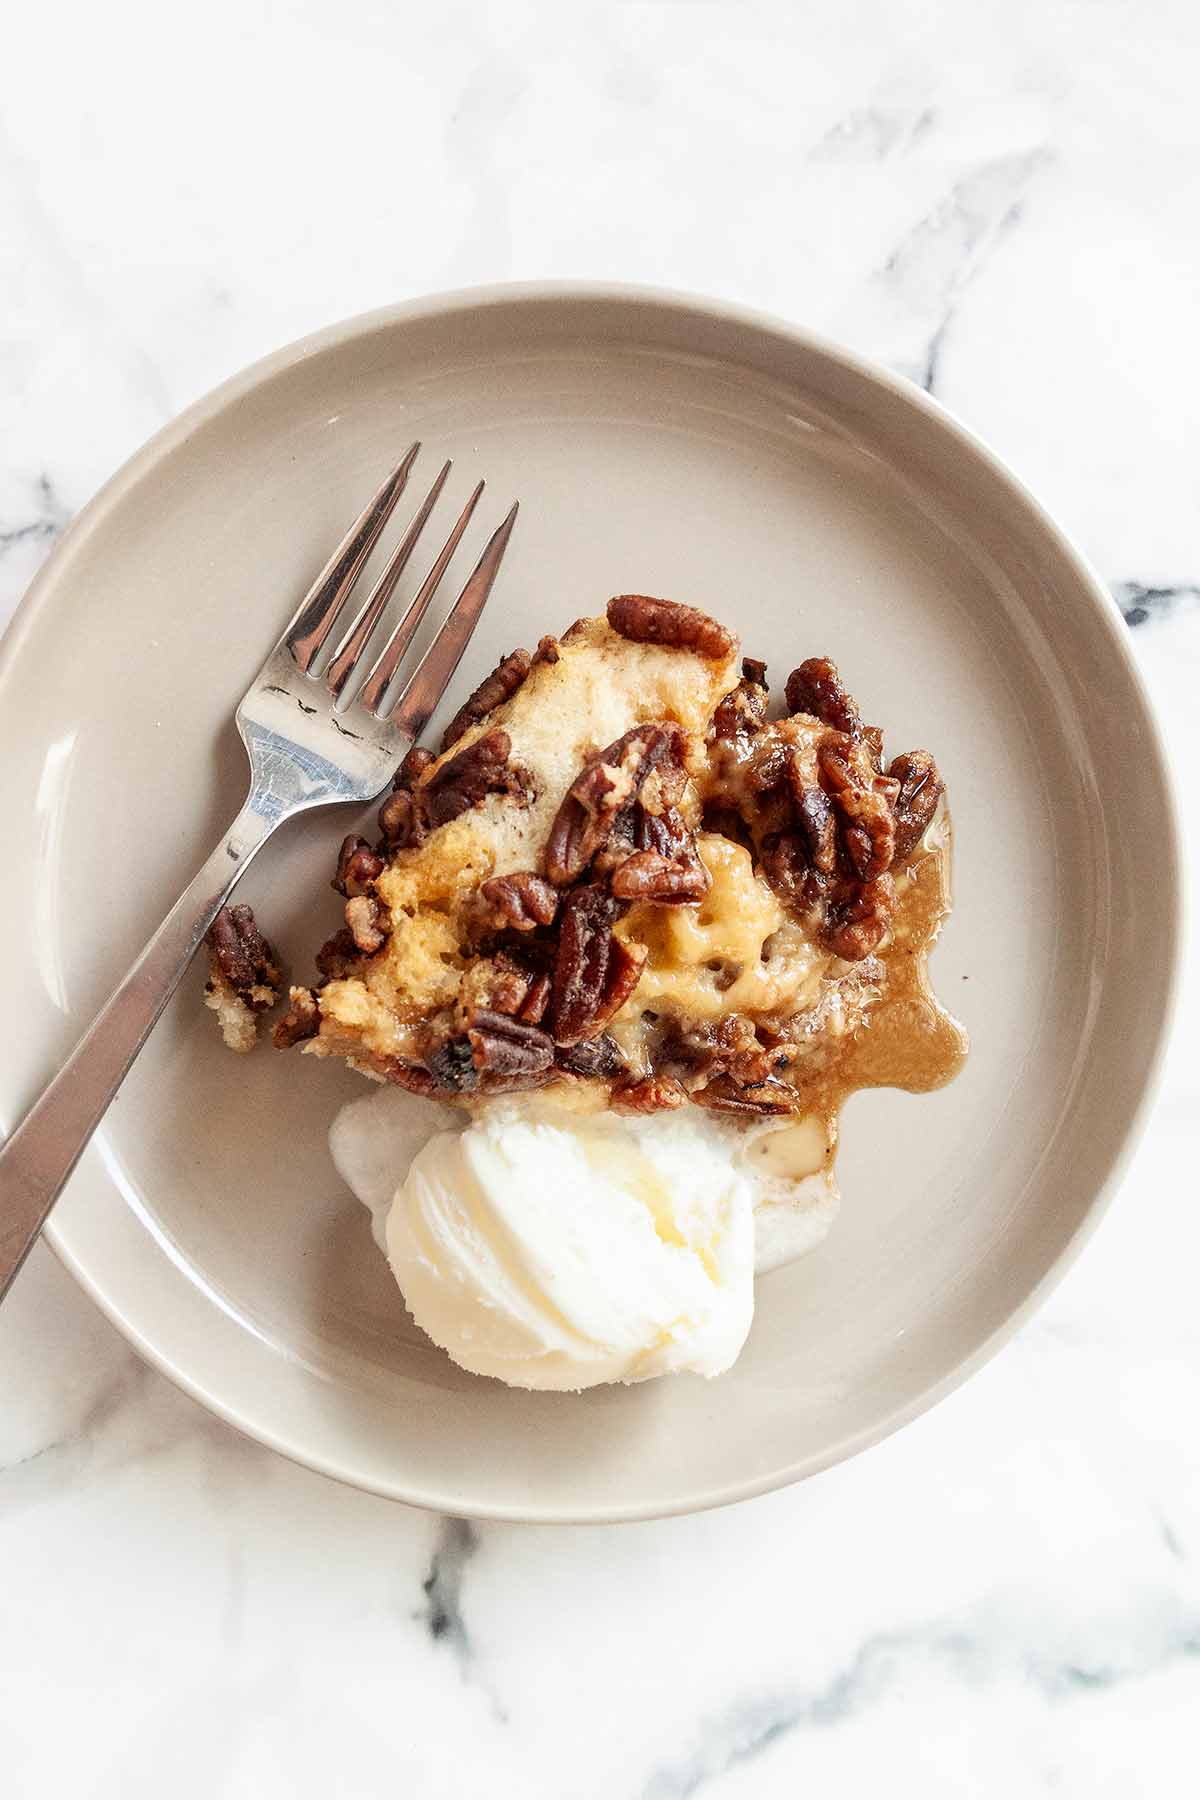 A serving of pecan pie cobbler with a scoop of ice cream and a fork on the side.